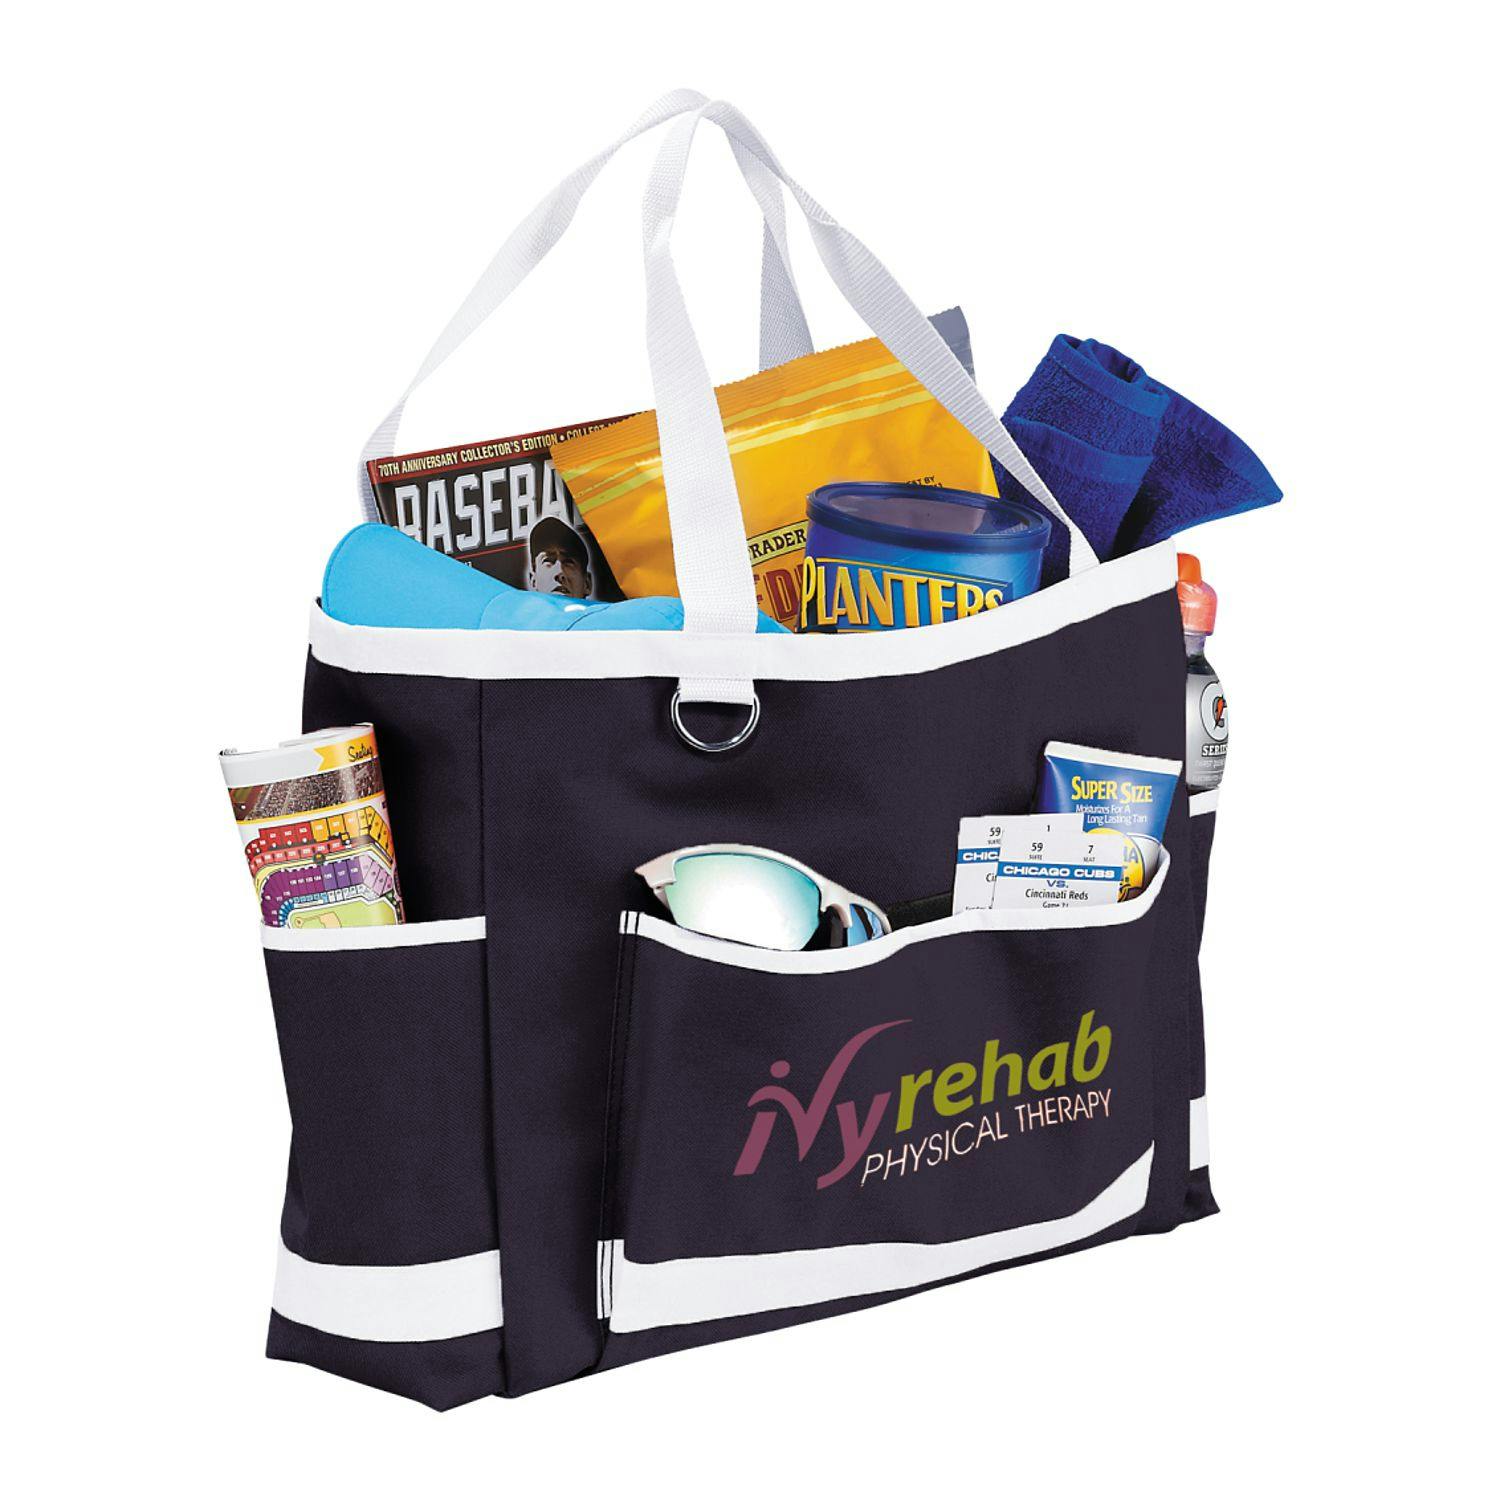 Game Day Carry-All Tote - additional Image 1